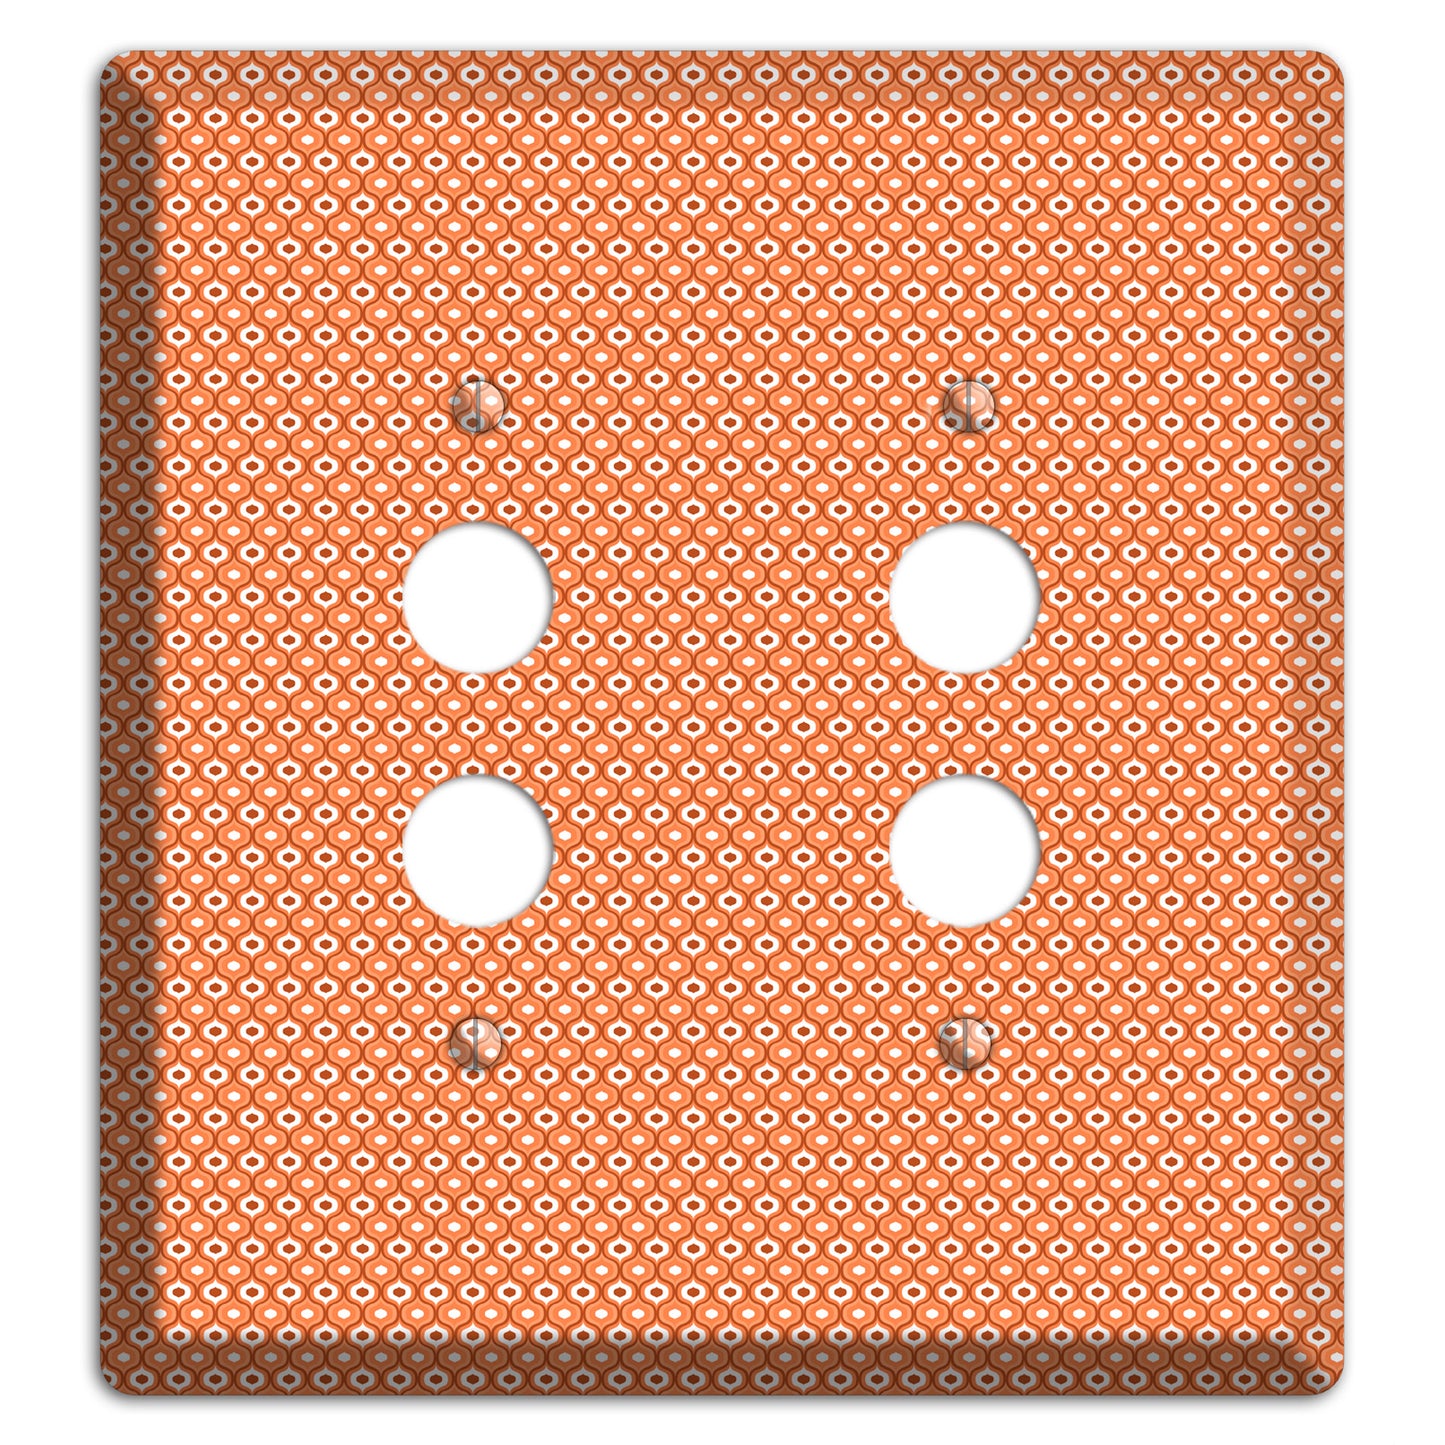 Coral Tiny Double Scallop 2 Pushbutton Wallplate